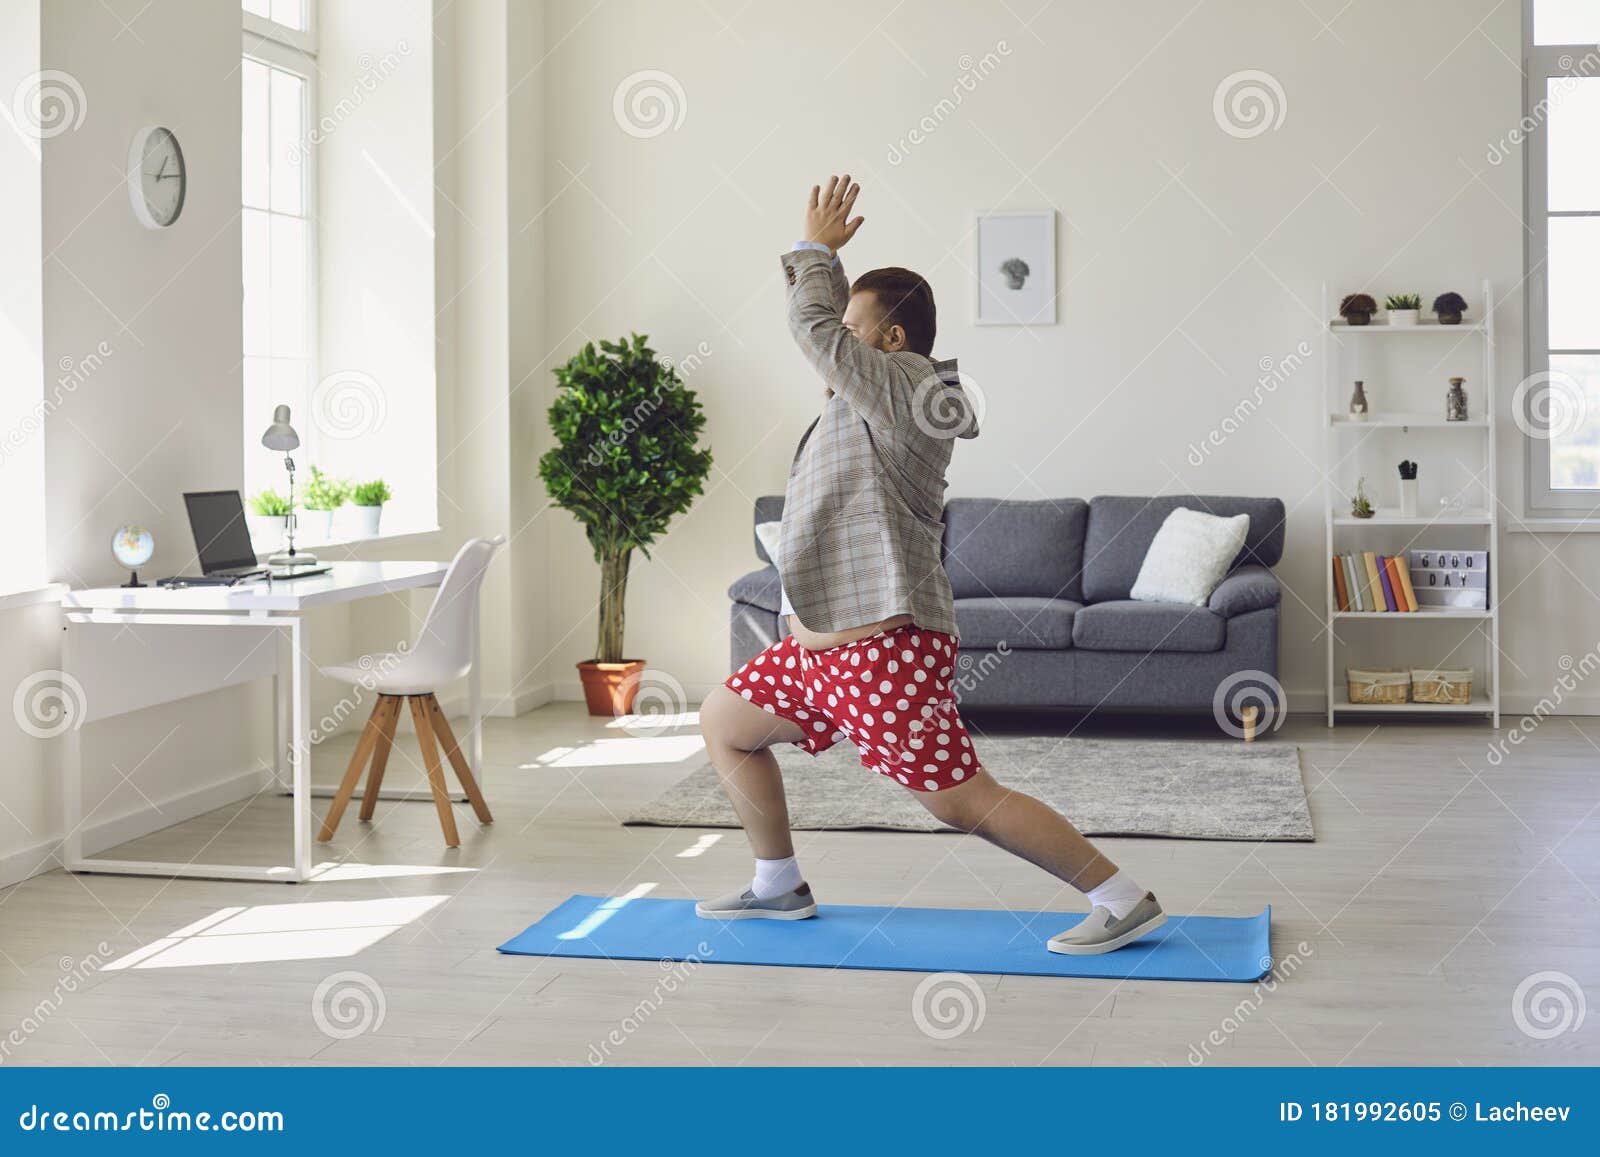 Yoga Work at Home. Funny Fat Man Practices Yoga Meditation while ...